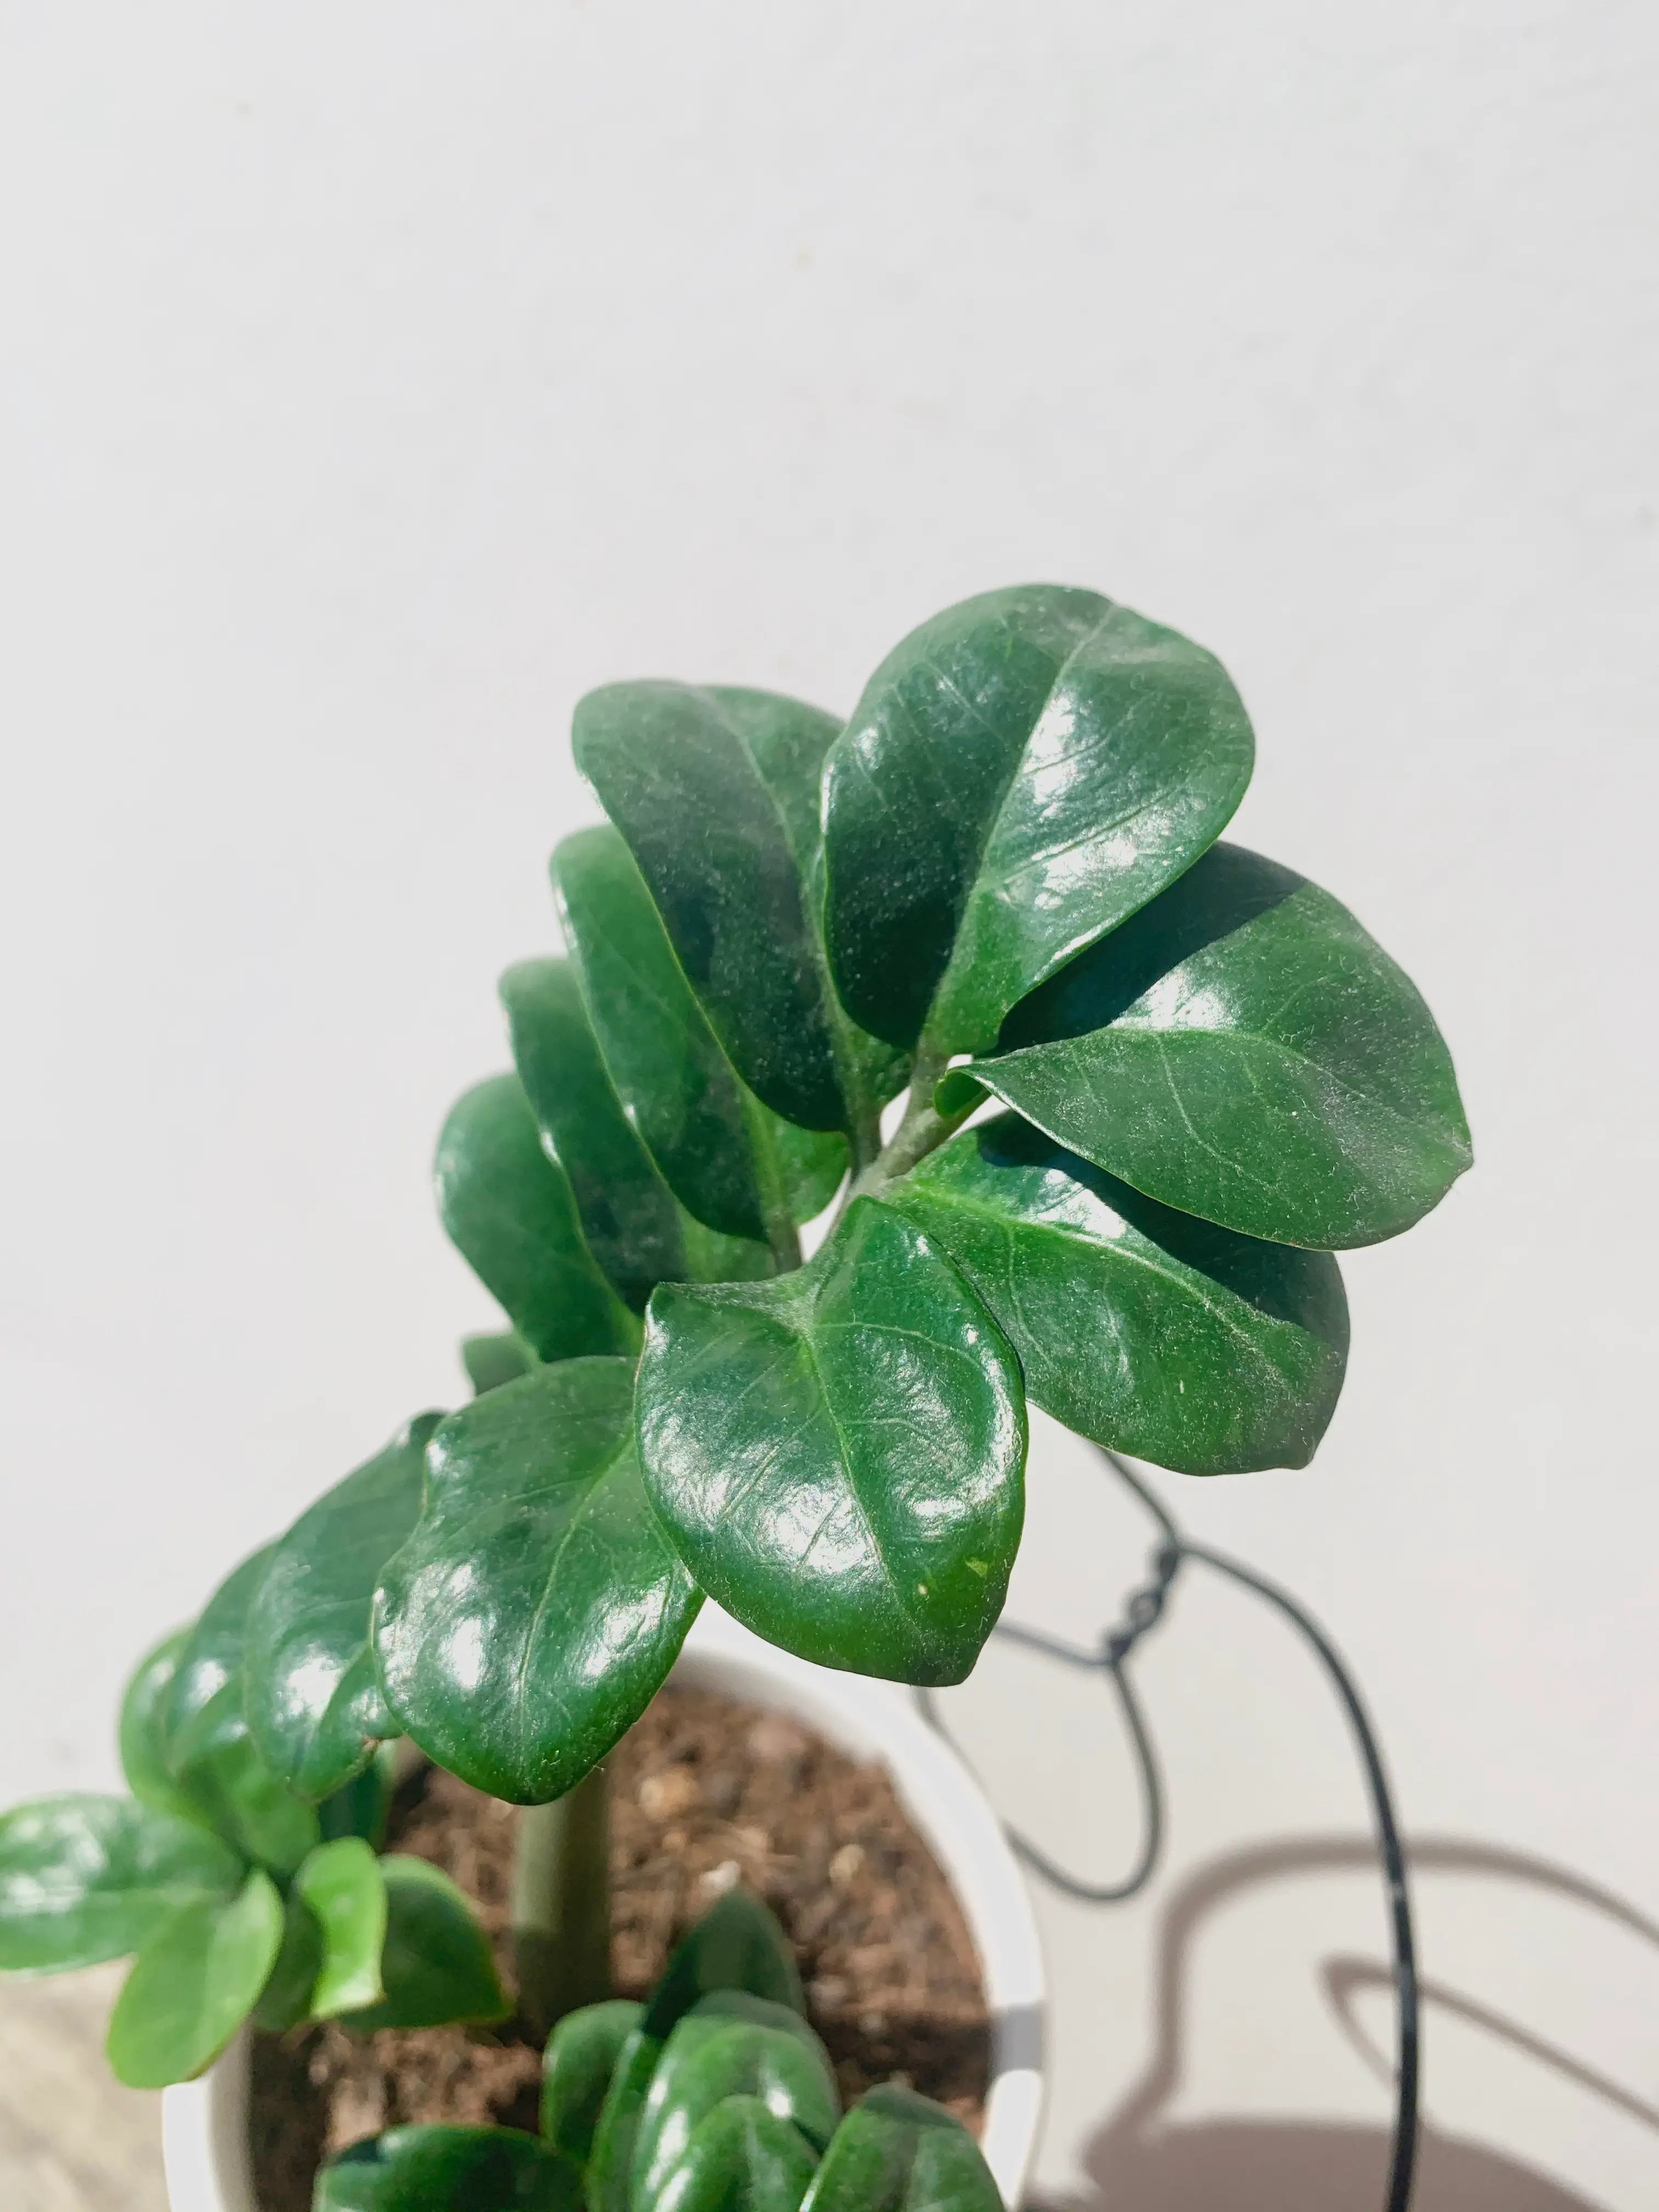 ZZ Plant Green with leaves and stem